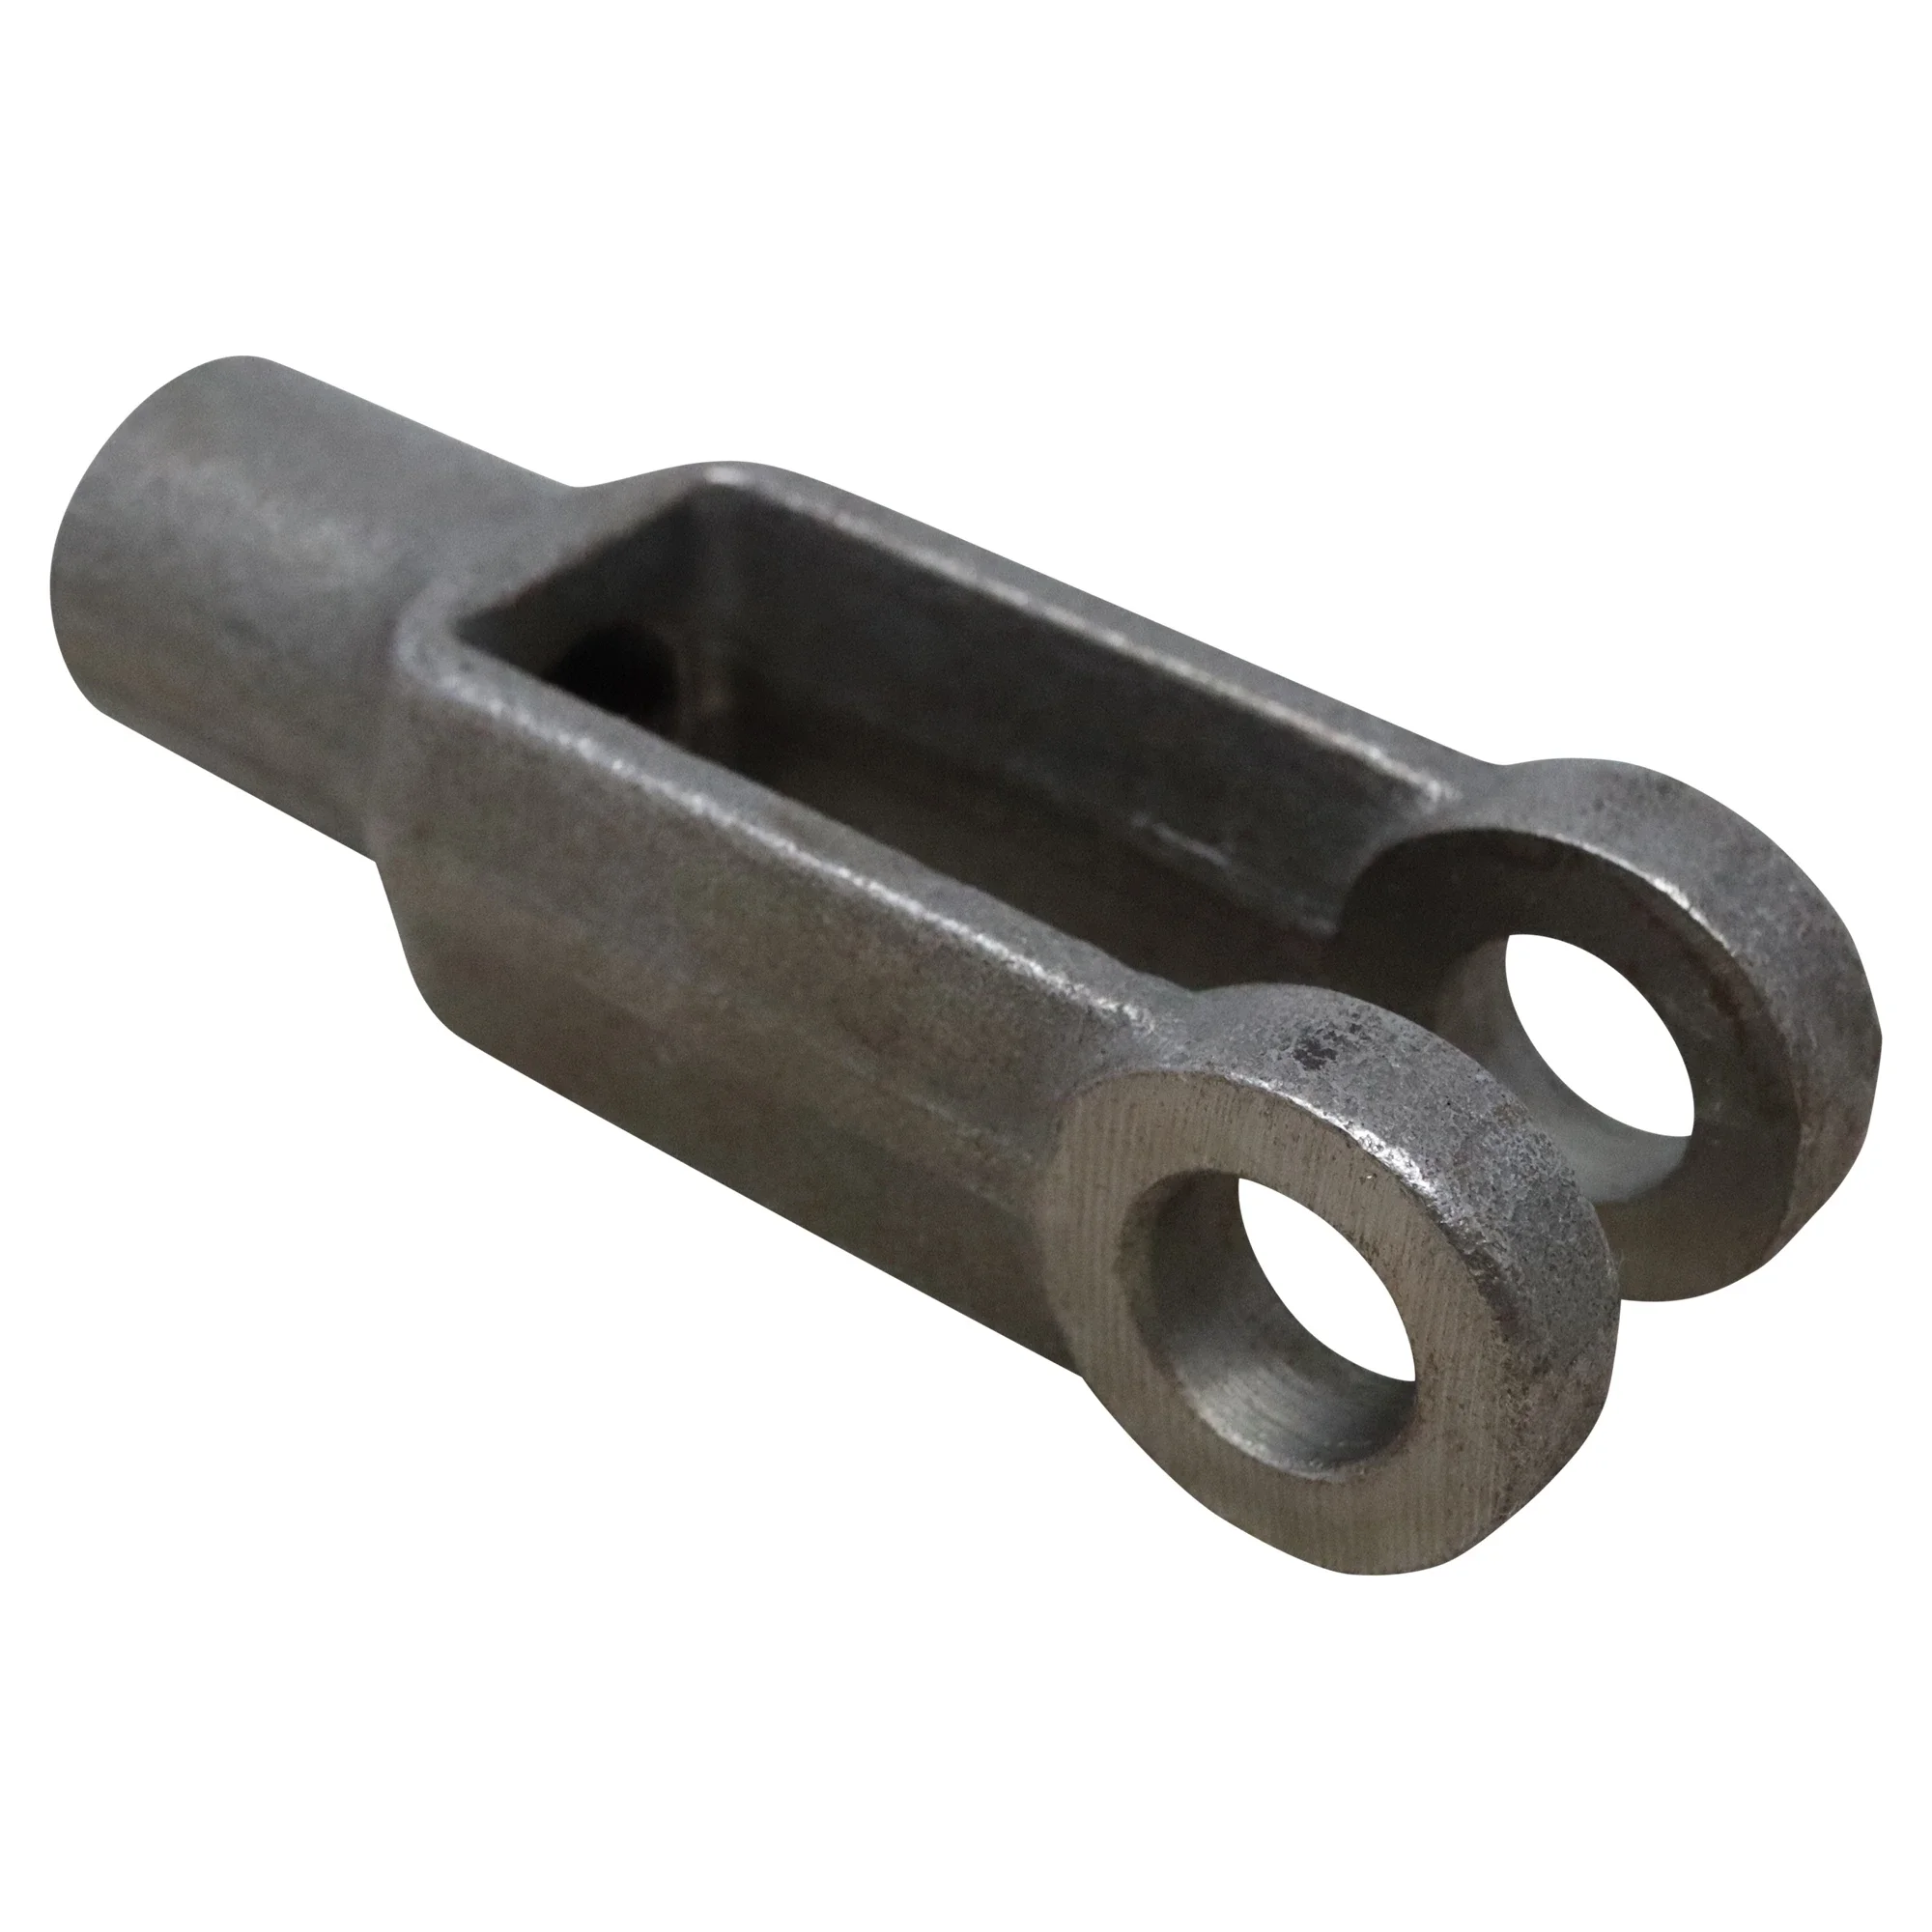 Wastebuilt® Replacement for Heil Rod End Clevis F5000